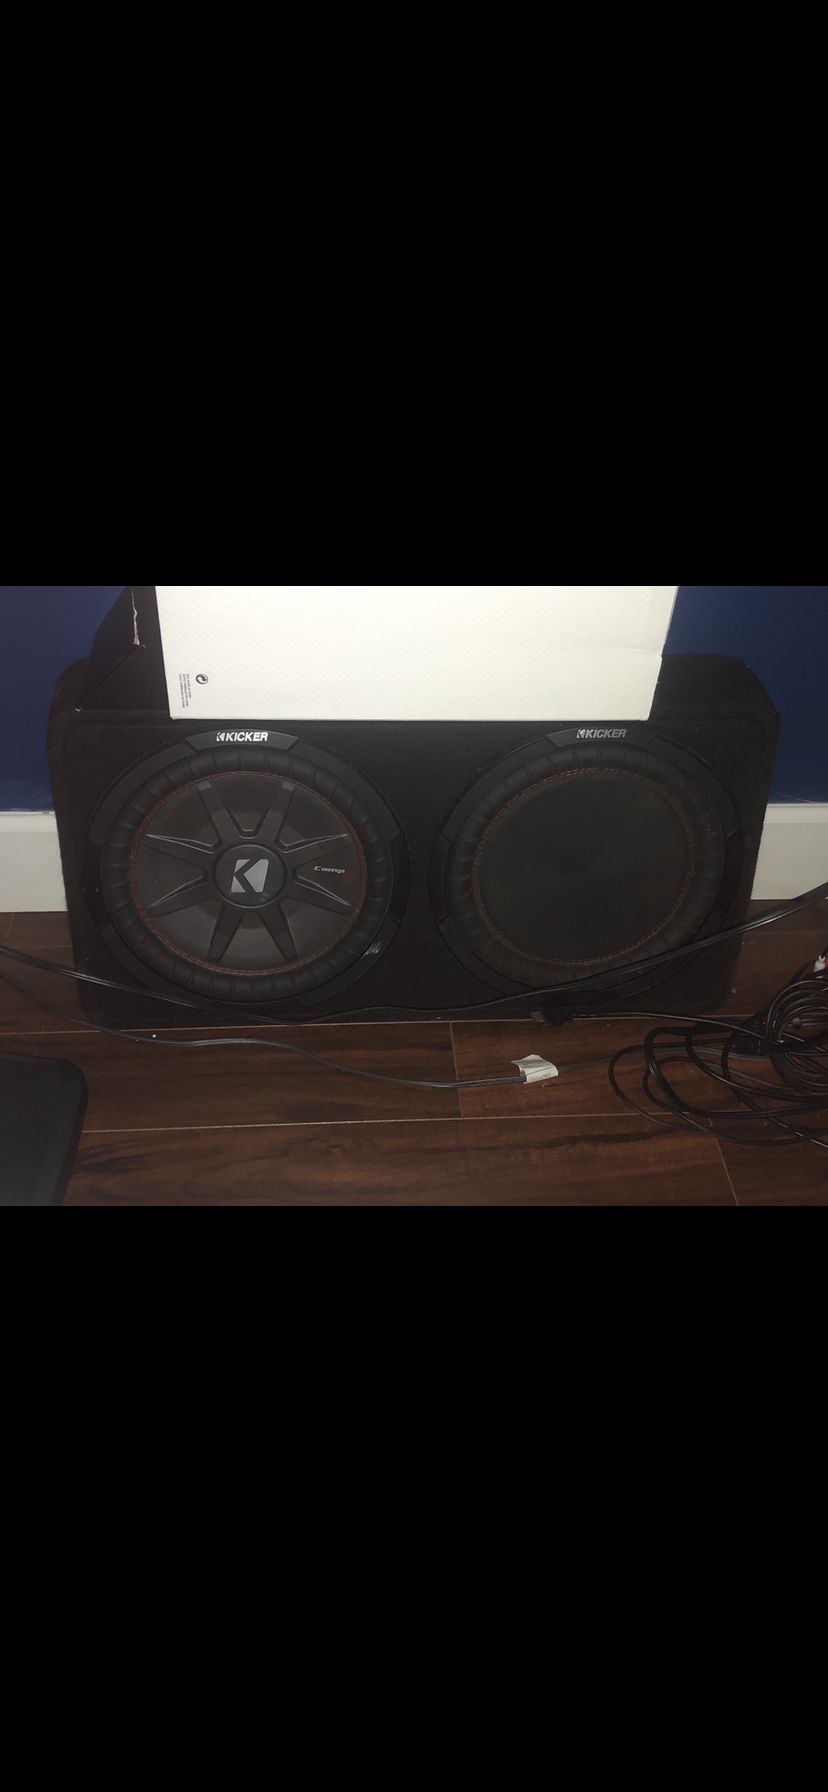 TWO 12s like new in box $150 two amps kicker$85